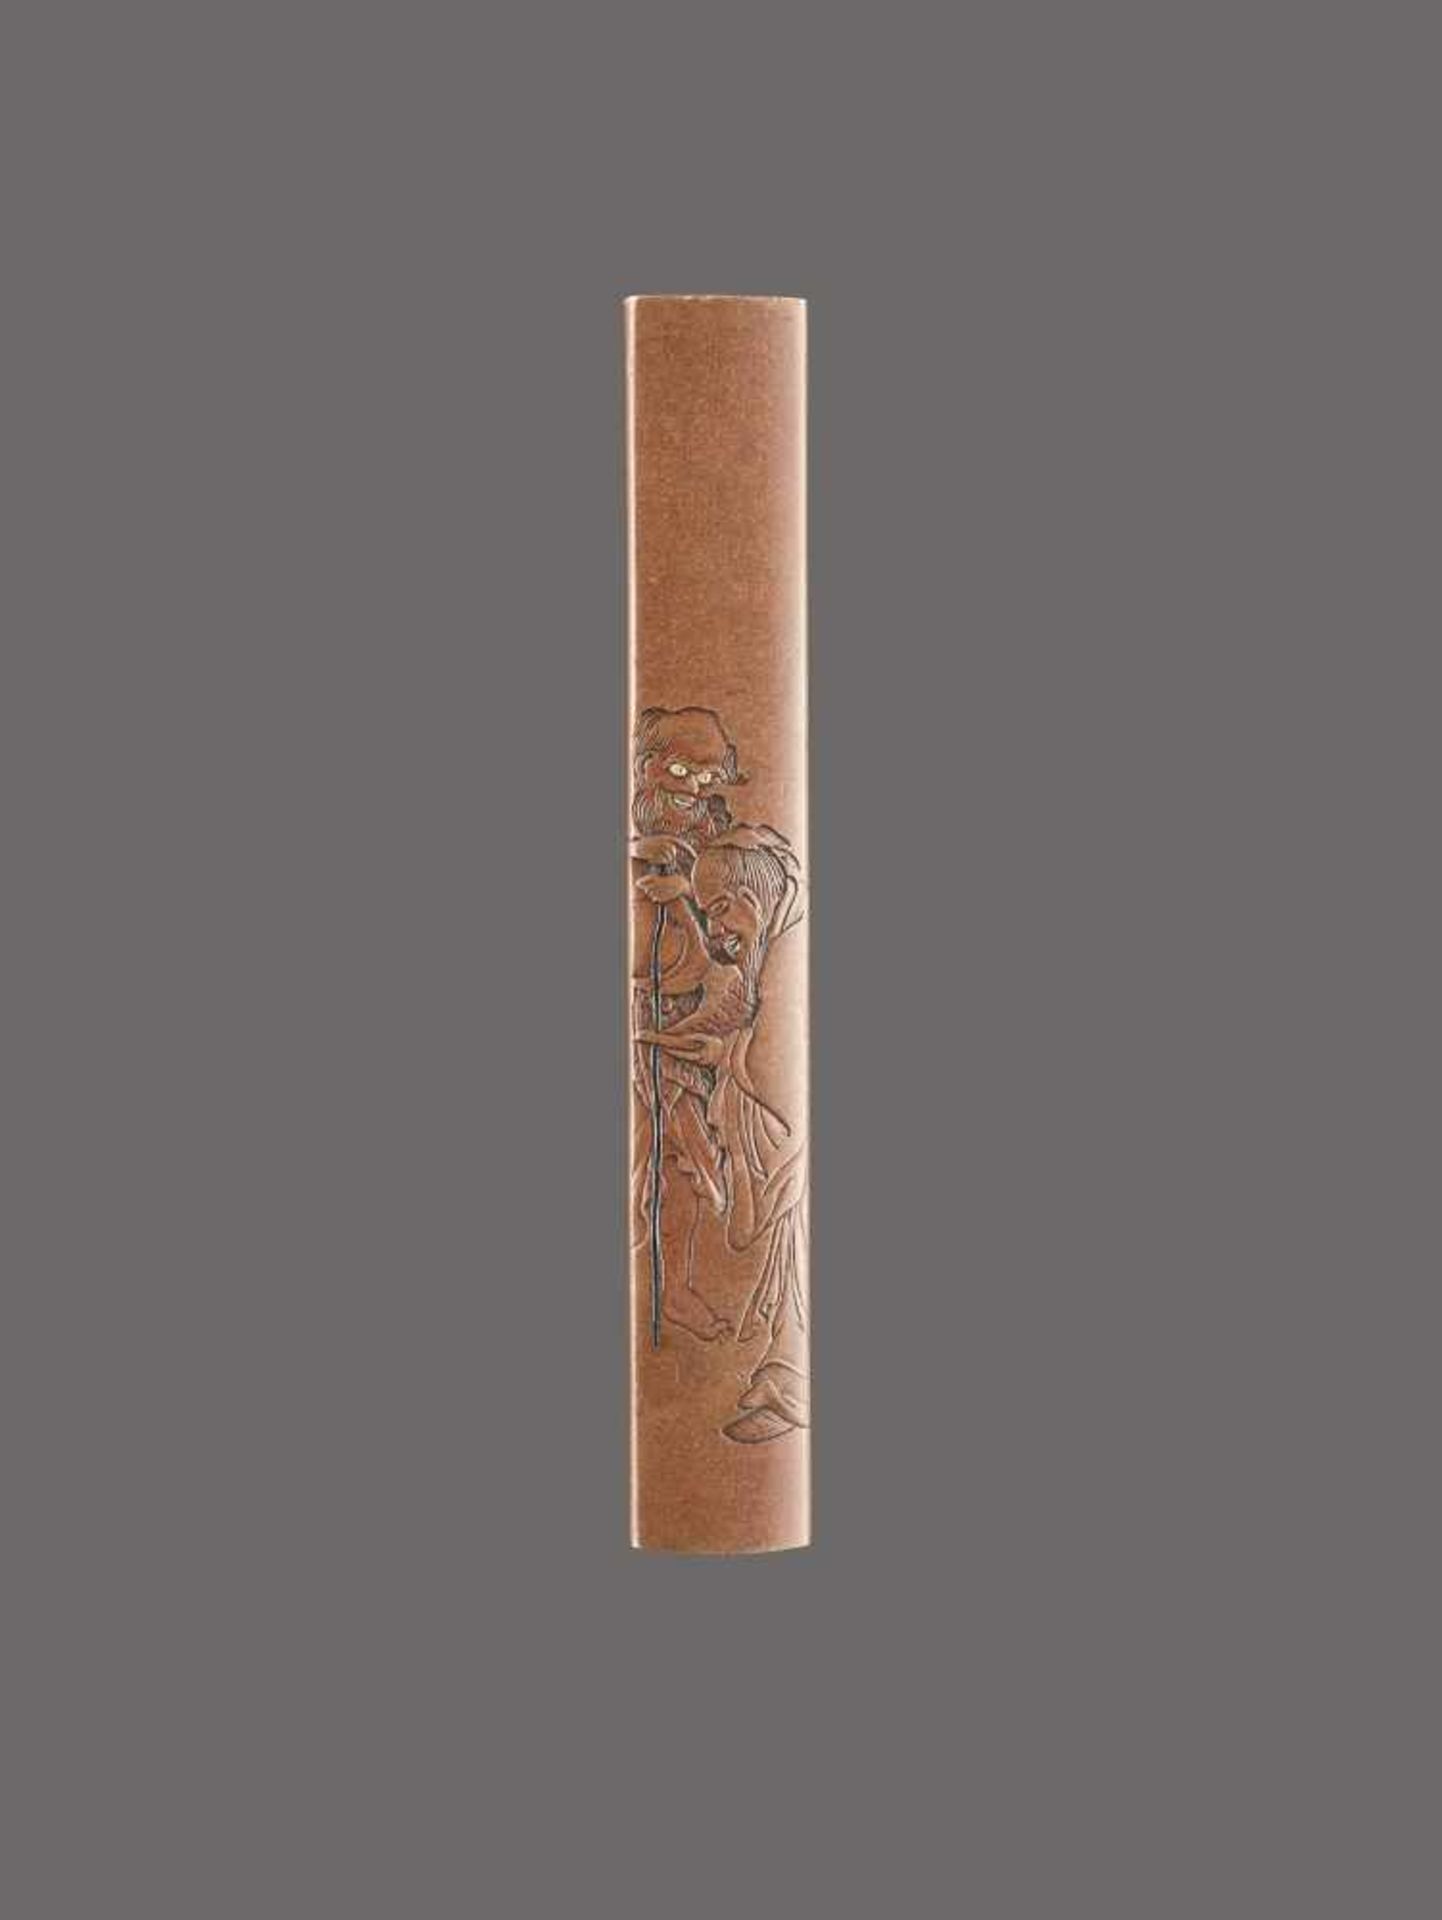 A COPPER KOZUKA HANDLE OF TWO IMMORTALS BY NAOYUKI By Naoyuki, kozuka handle, copper and some gold